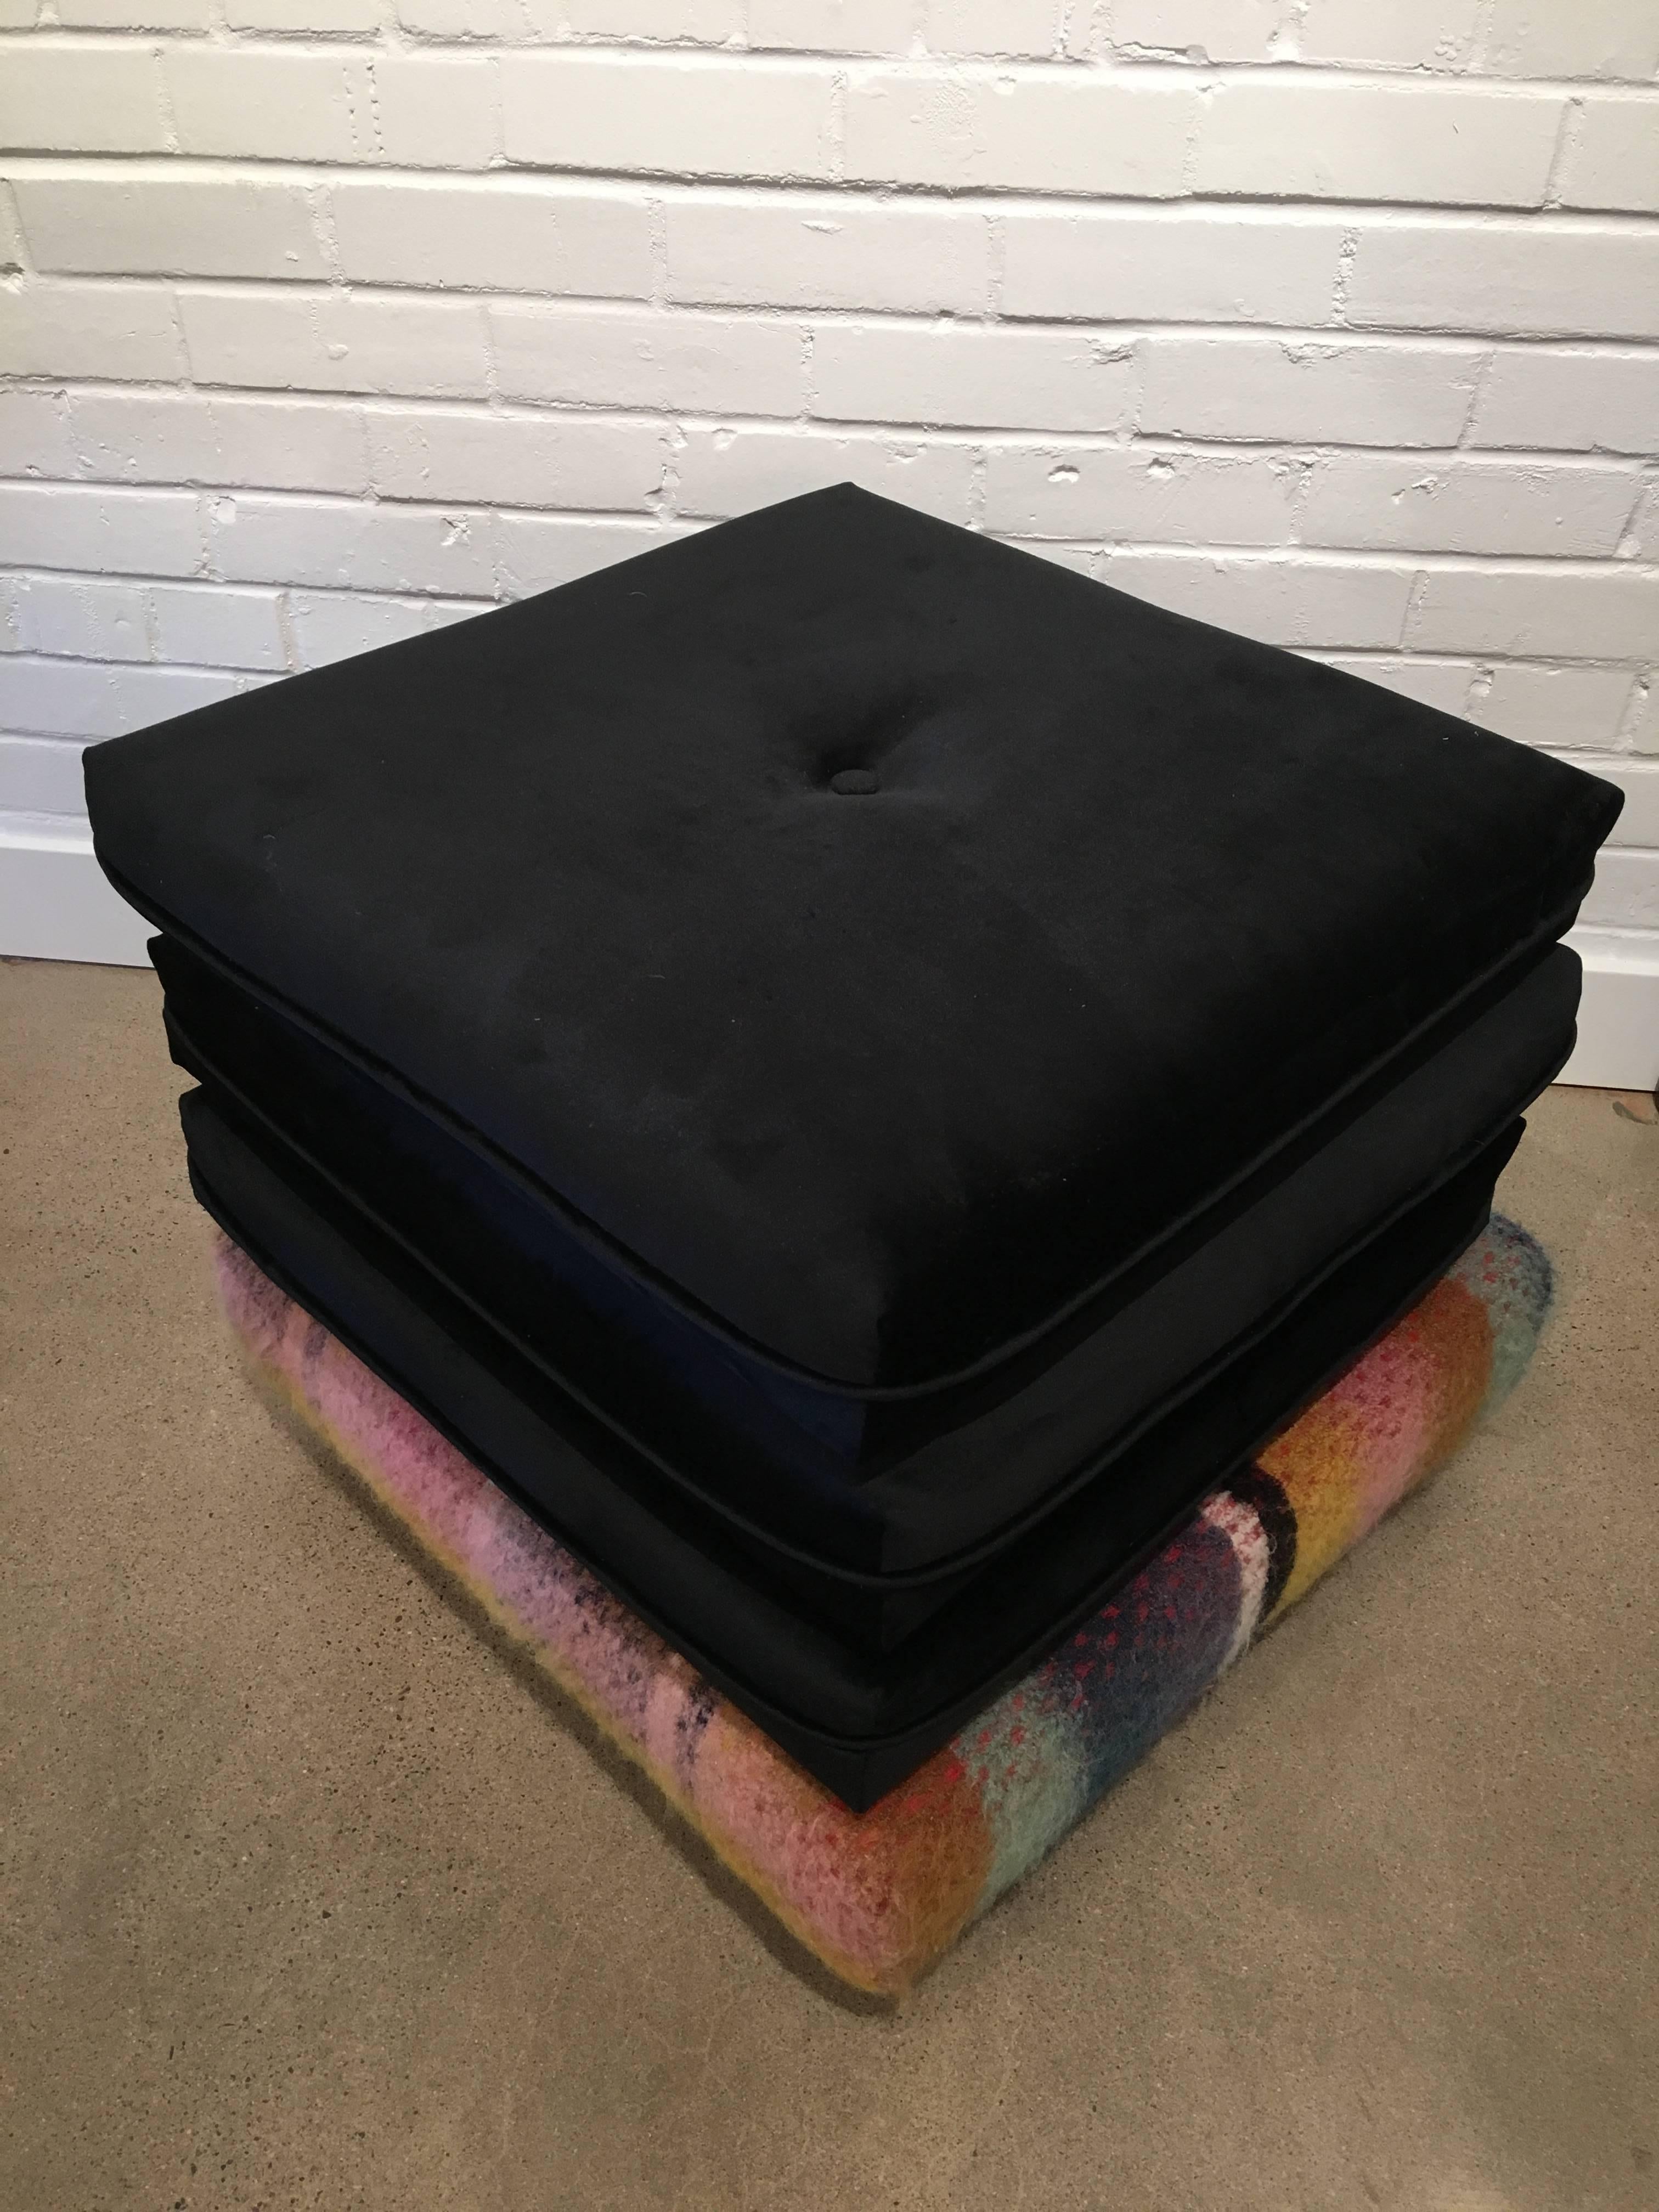 These vintage beauties have just been reupholstered in Clarence House black sueded cotton with the base (on wheels) upholstered in a new Pierre Frey multicolored wool plaid. The pillows can be removed and used as floor cushions for a chic and